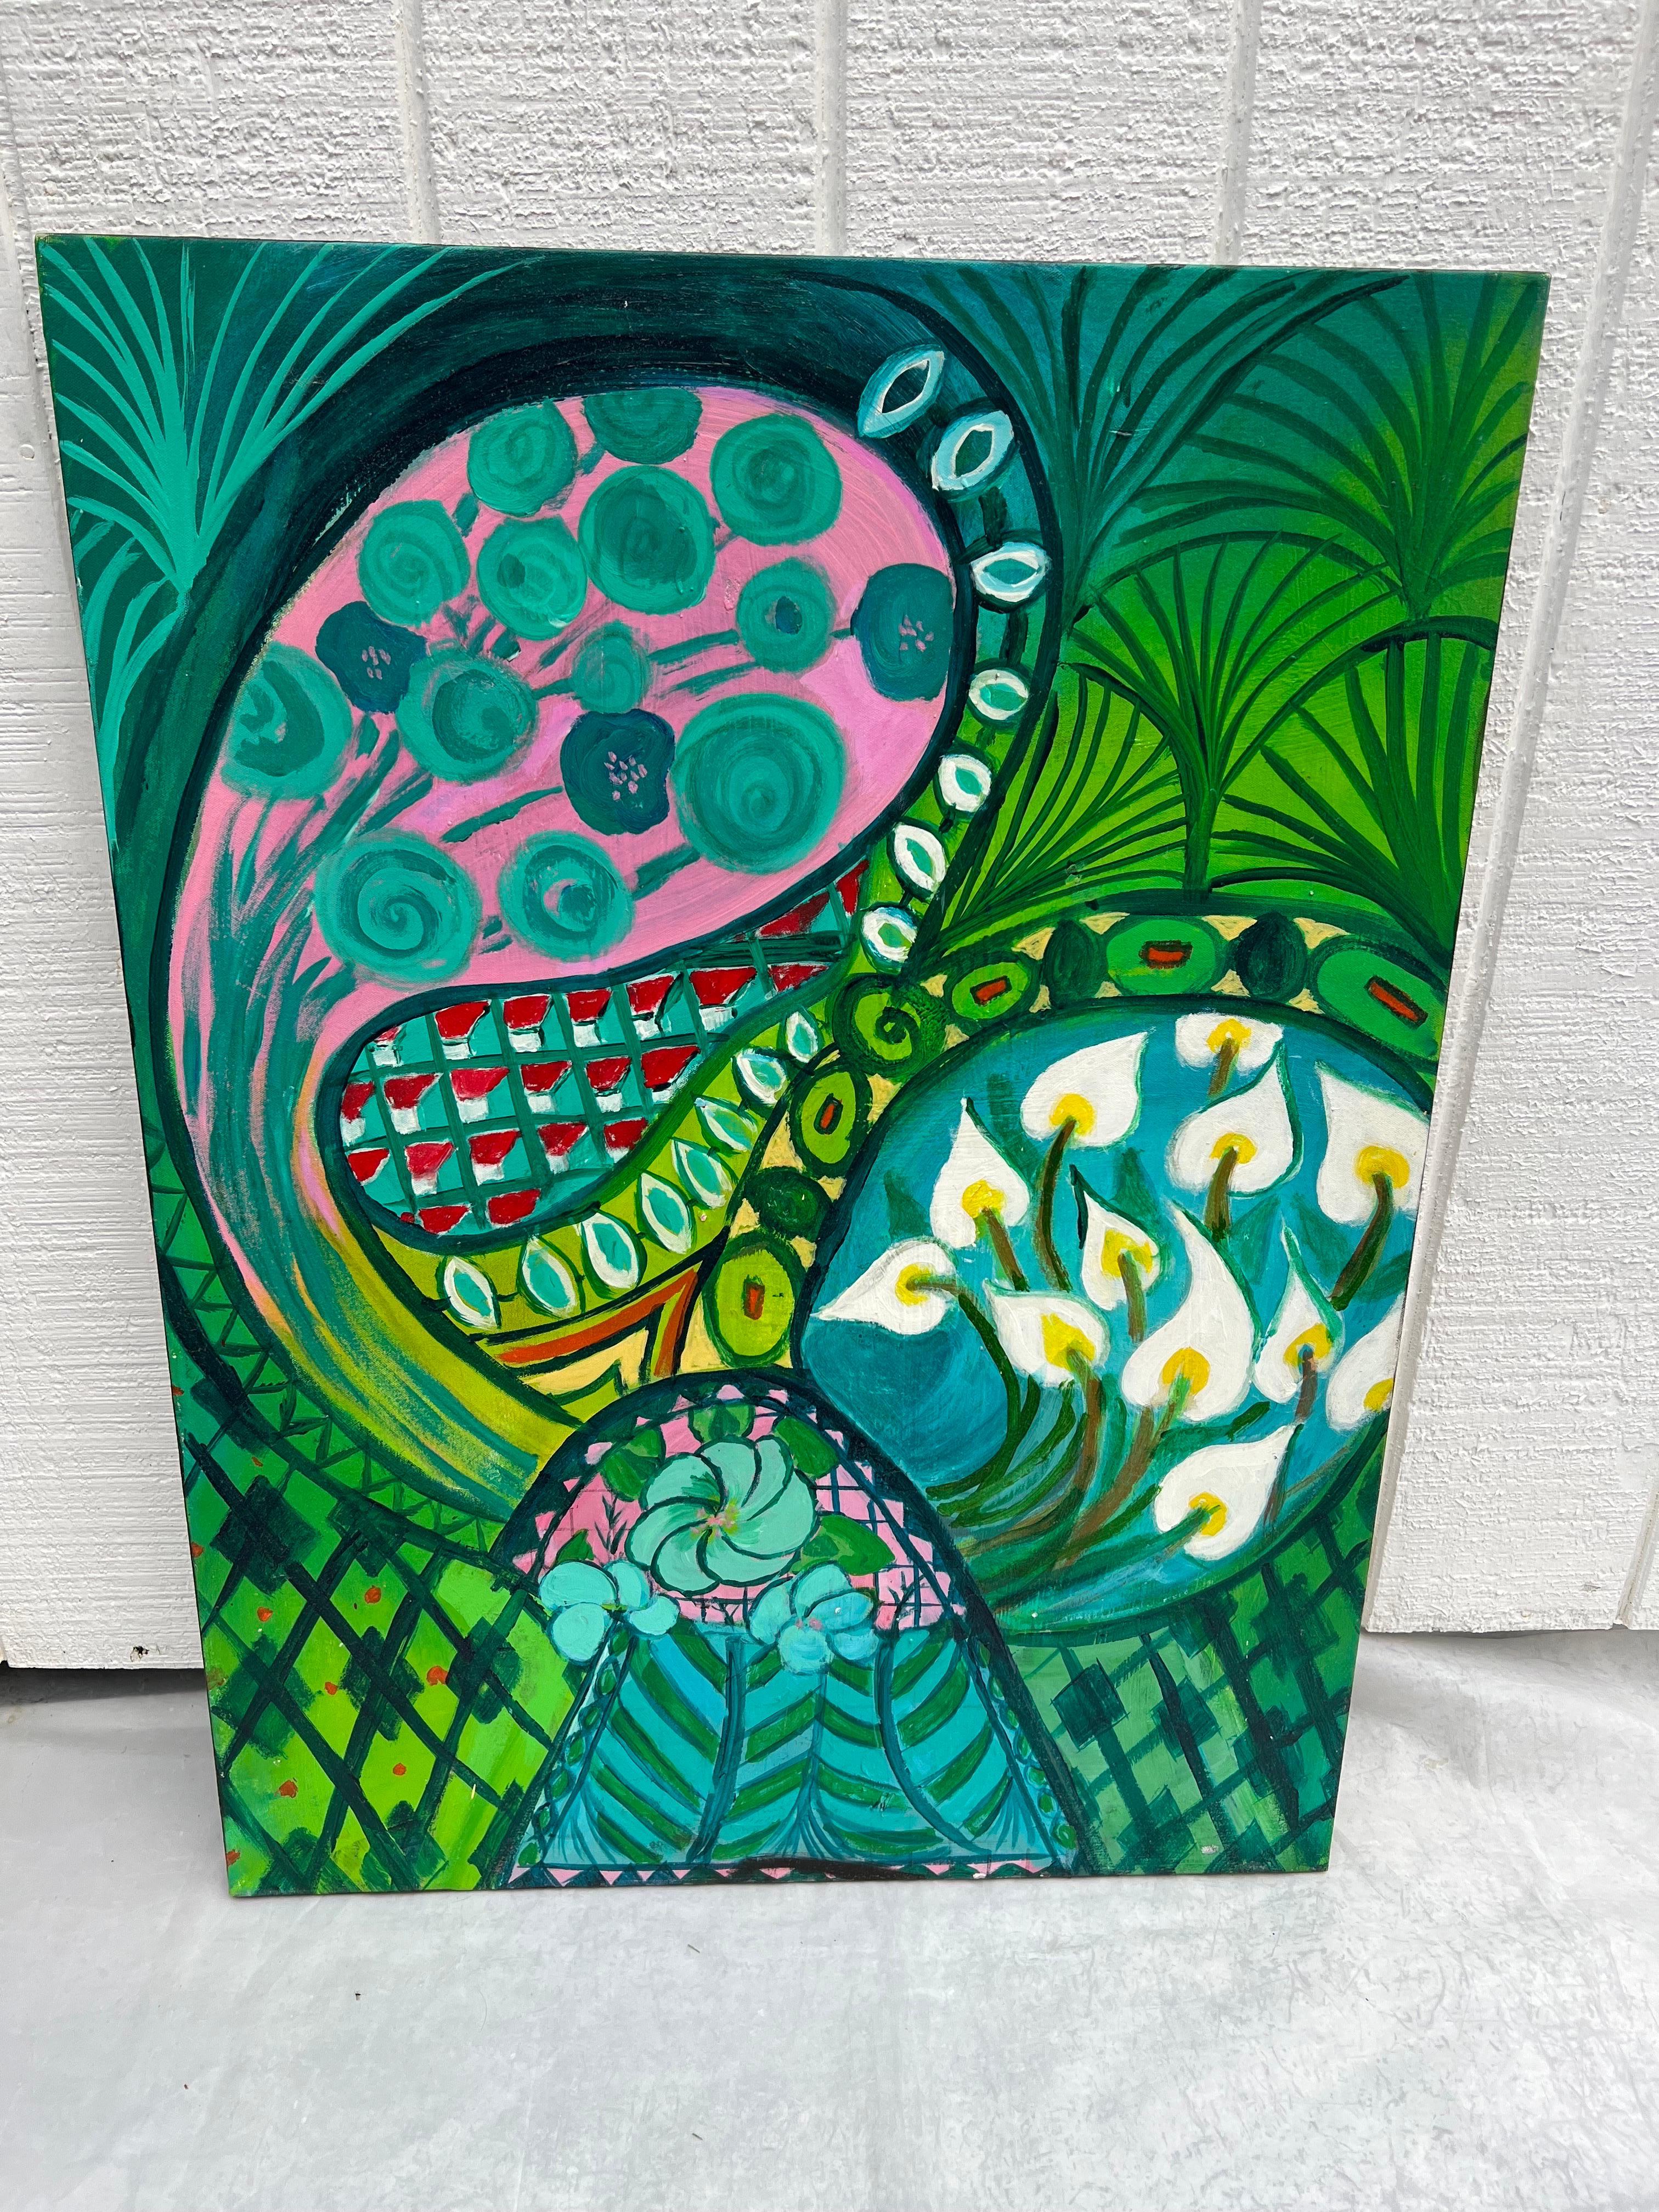 Carol Bertrand. Green Paisley Meditative Series Painting 
 Amazing large colorful canvas with green, pink, white and yellow. Stylized flowers, paisley patterns and calla lillies. Signature of artist in the lower right corner.
Carol Kuhlman